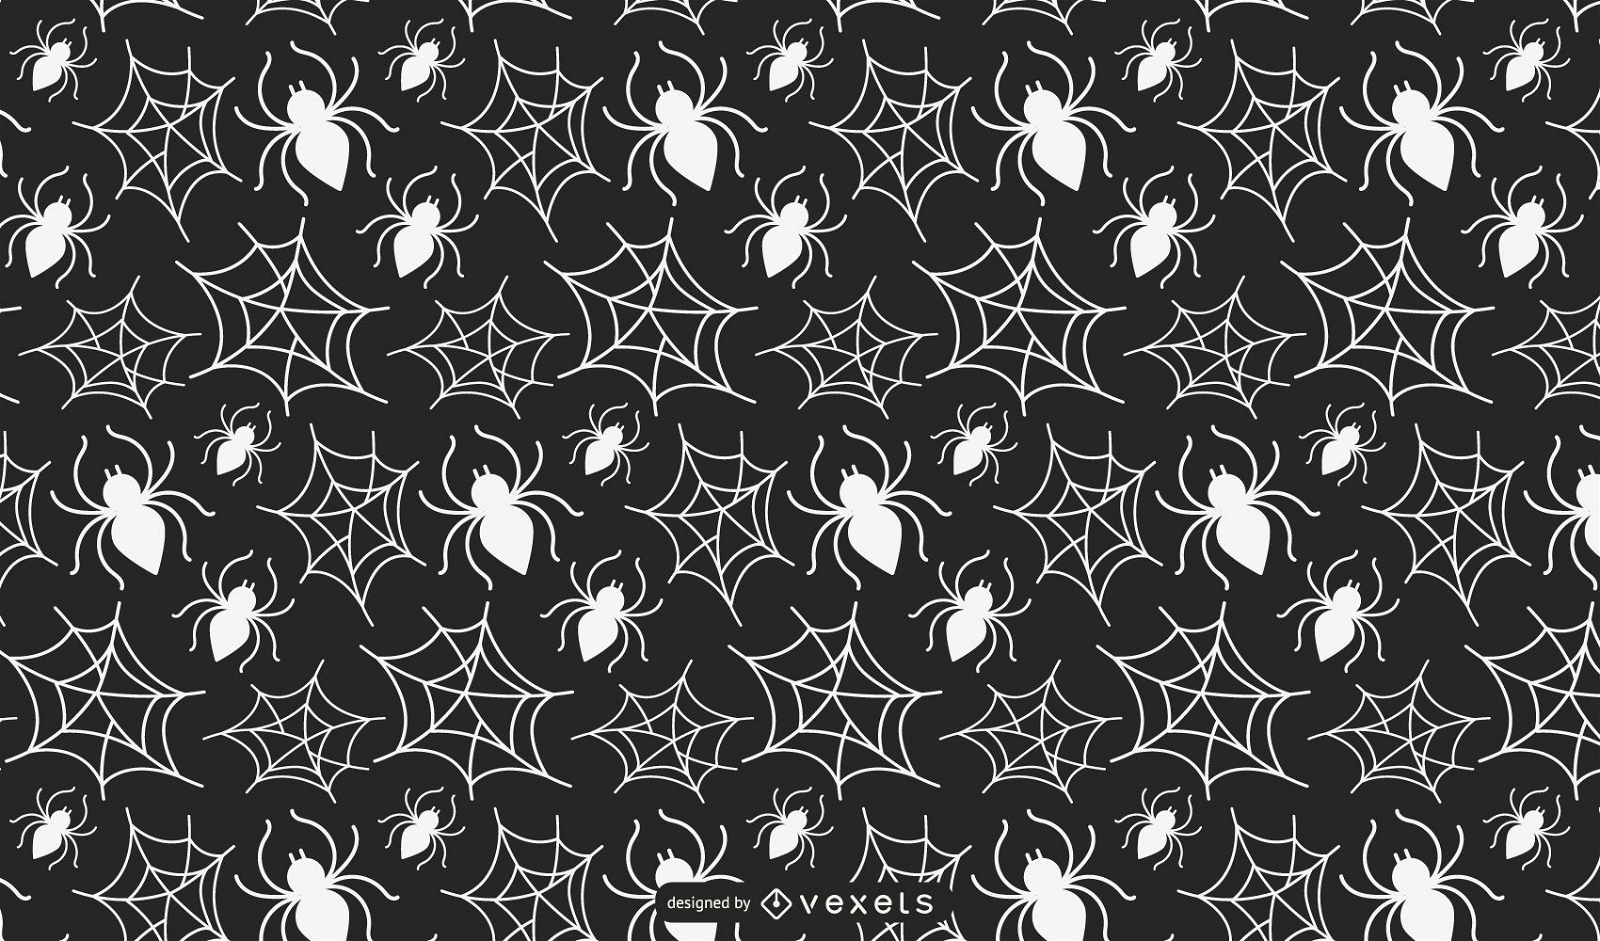 Spiders and Webs Pattern Design